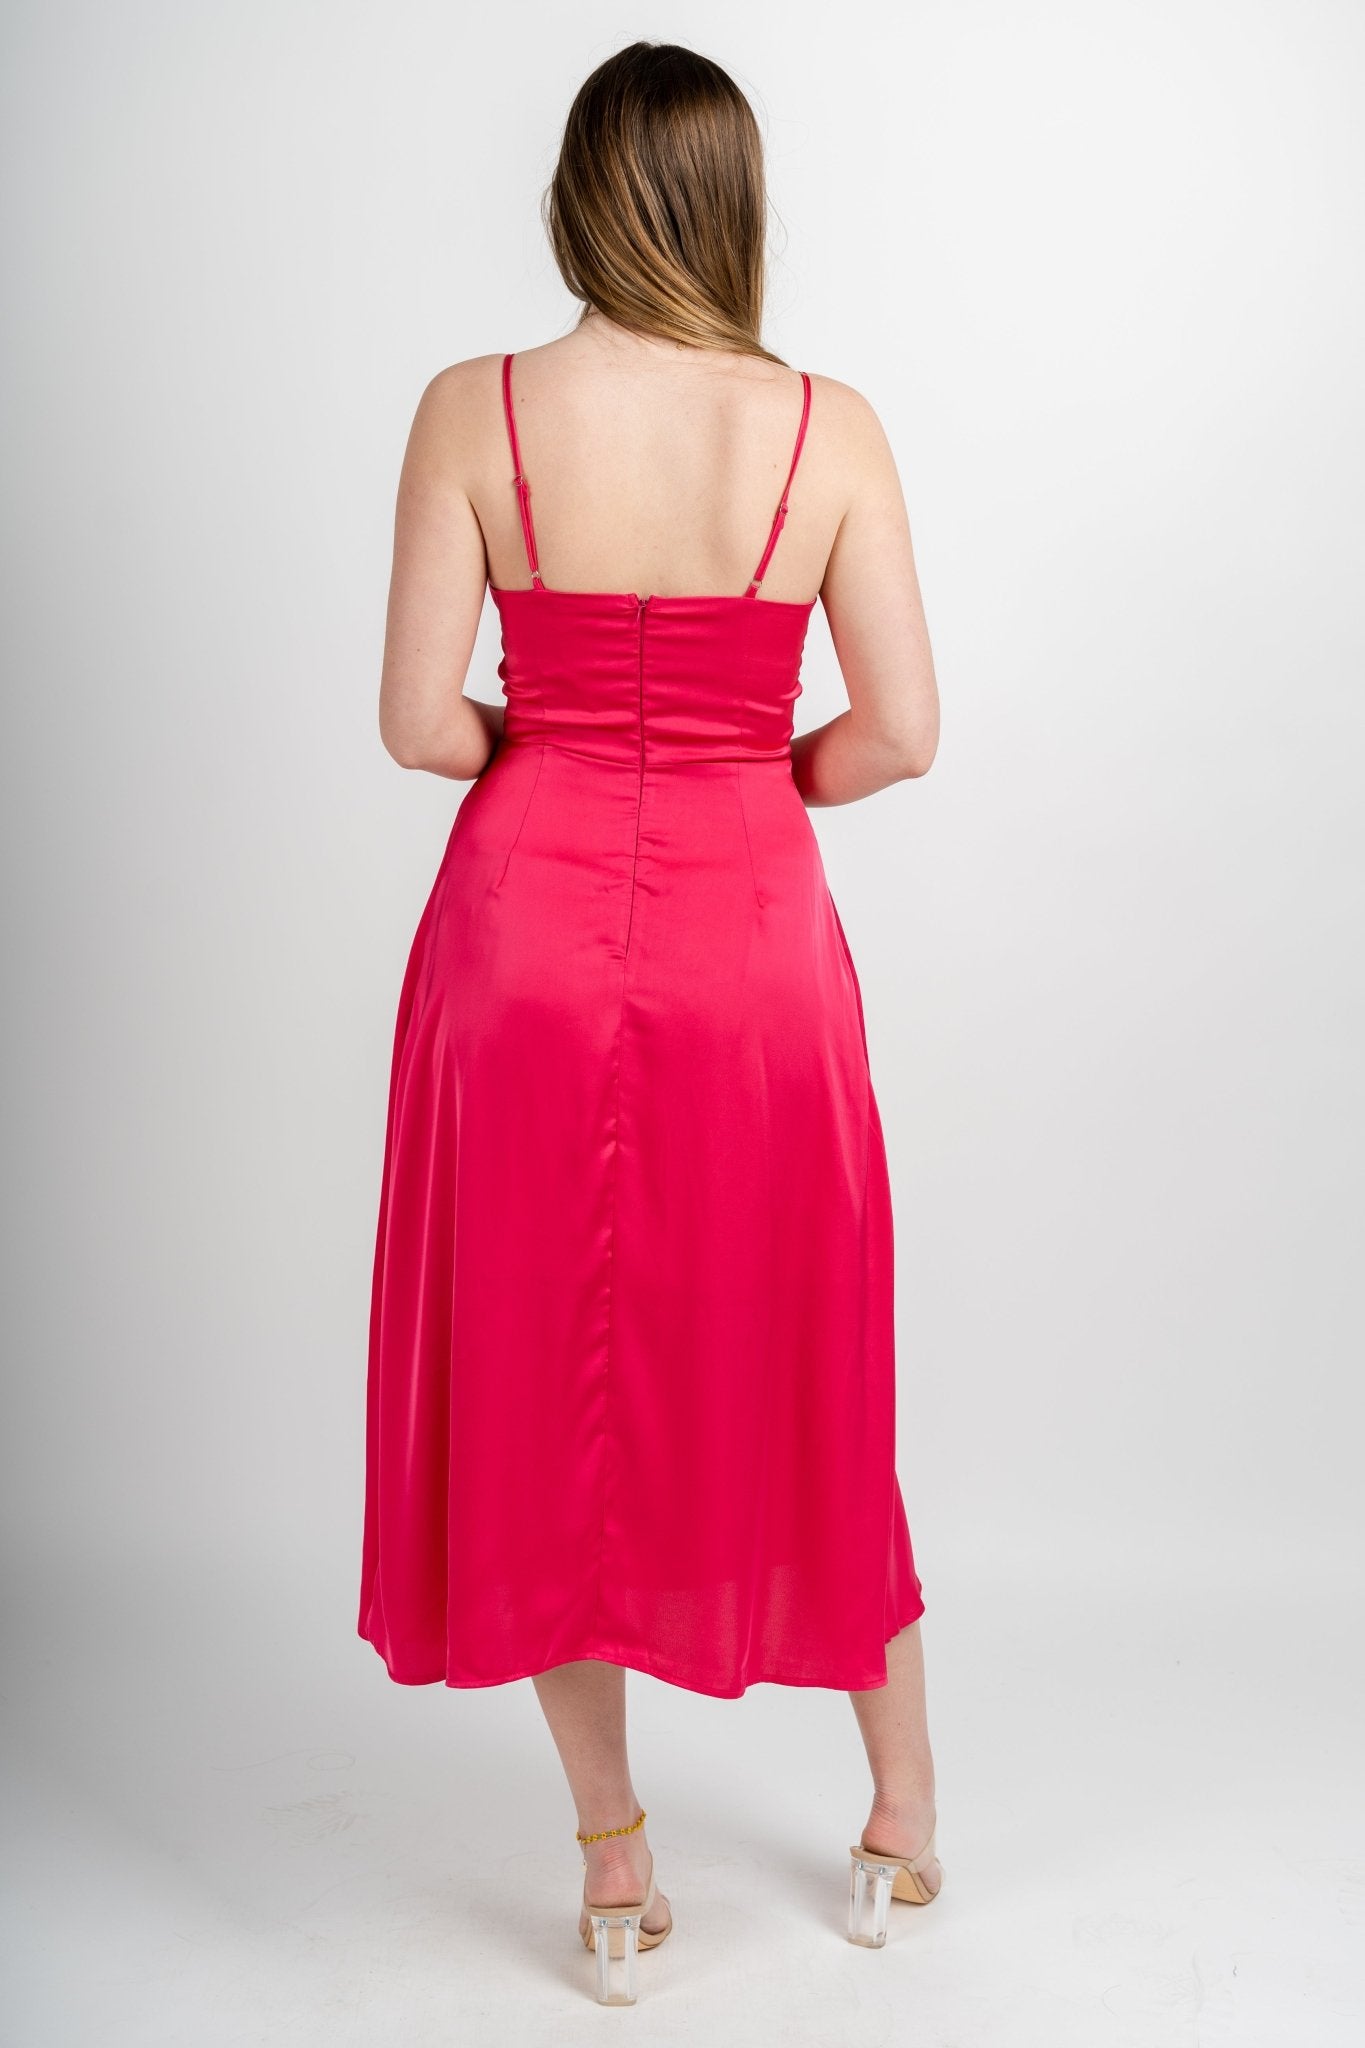 Satin bow detail dress fuchsia - Affordable Dresses - Boutique Dresses at Lush Fashion Lounge Boutique in Oklahoma City